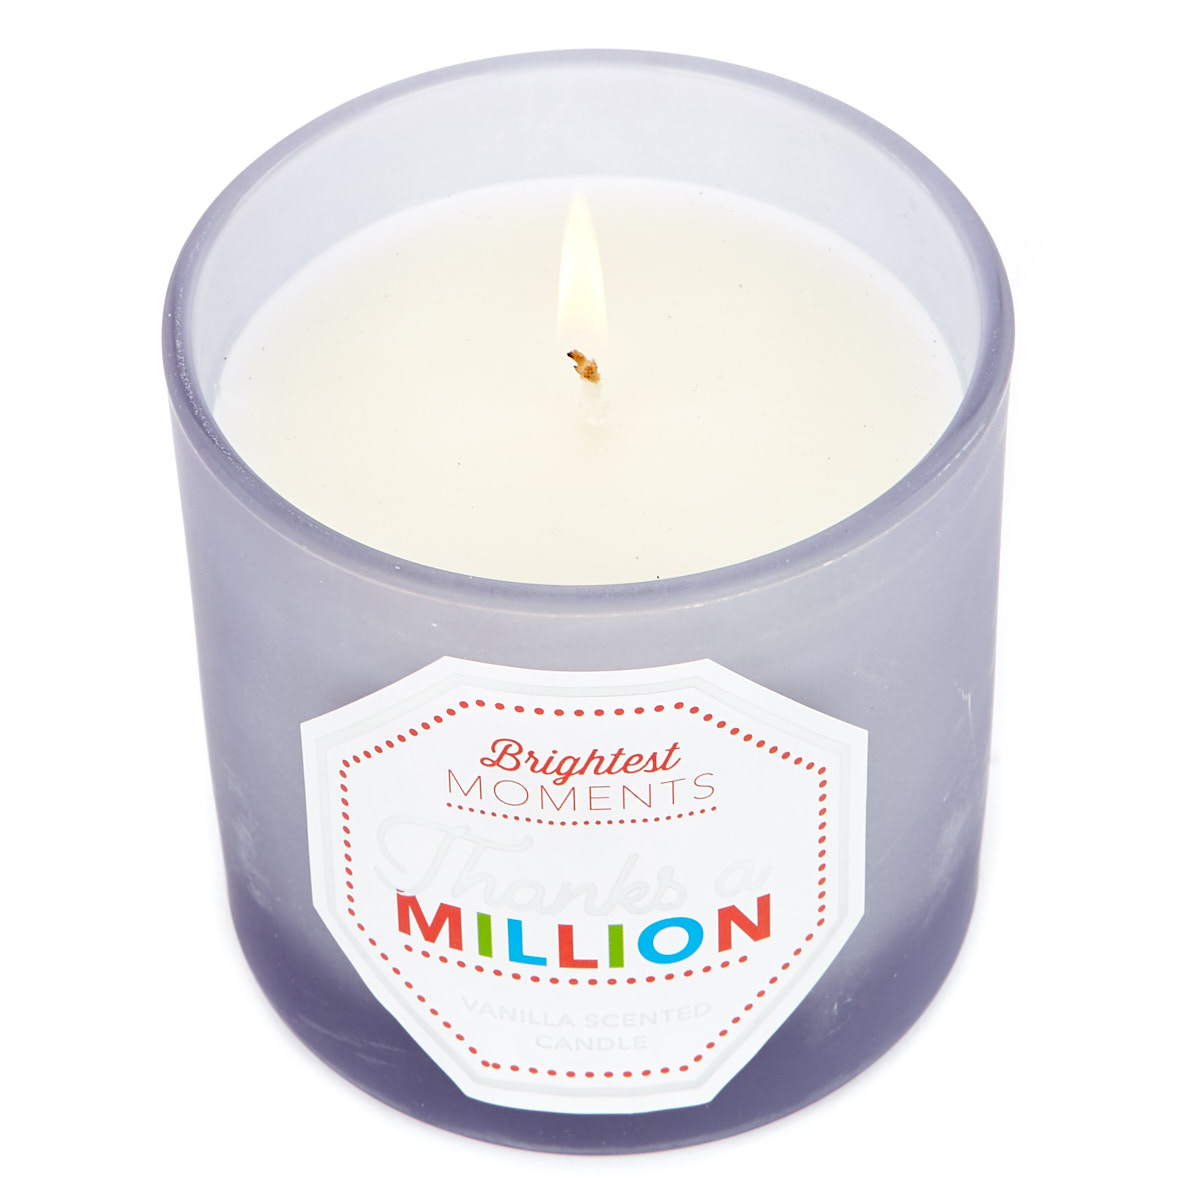 Brightest Moments Vanilla Scented Celebration Candle - Thanks A Million